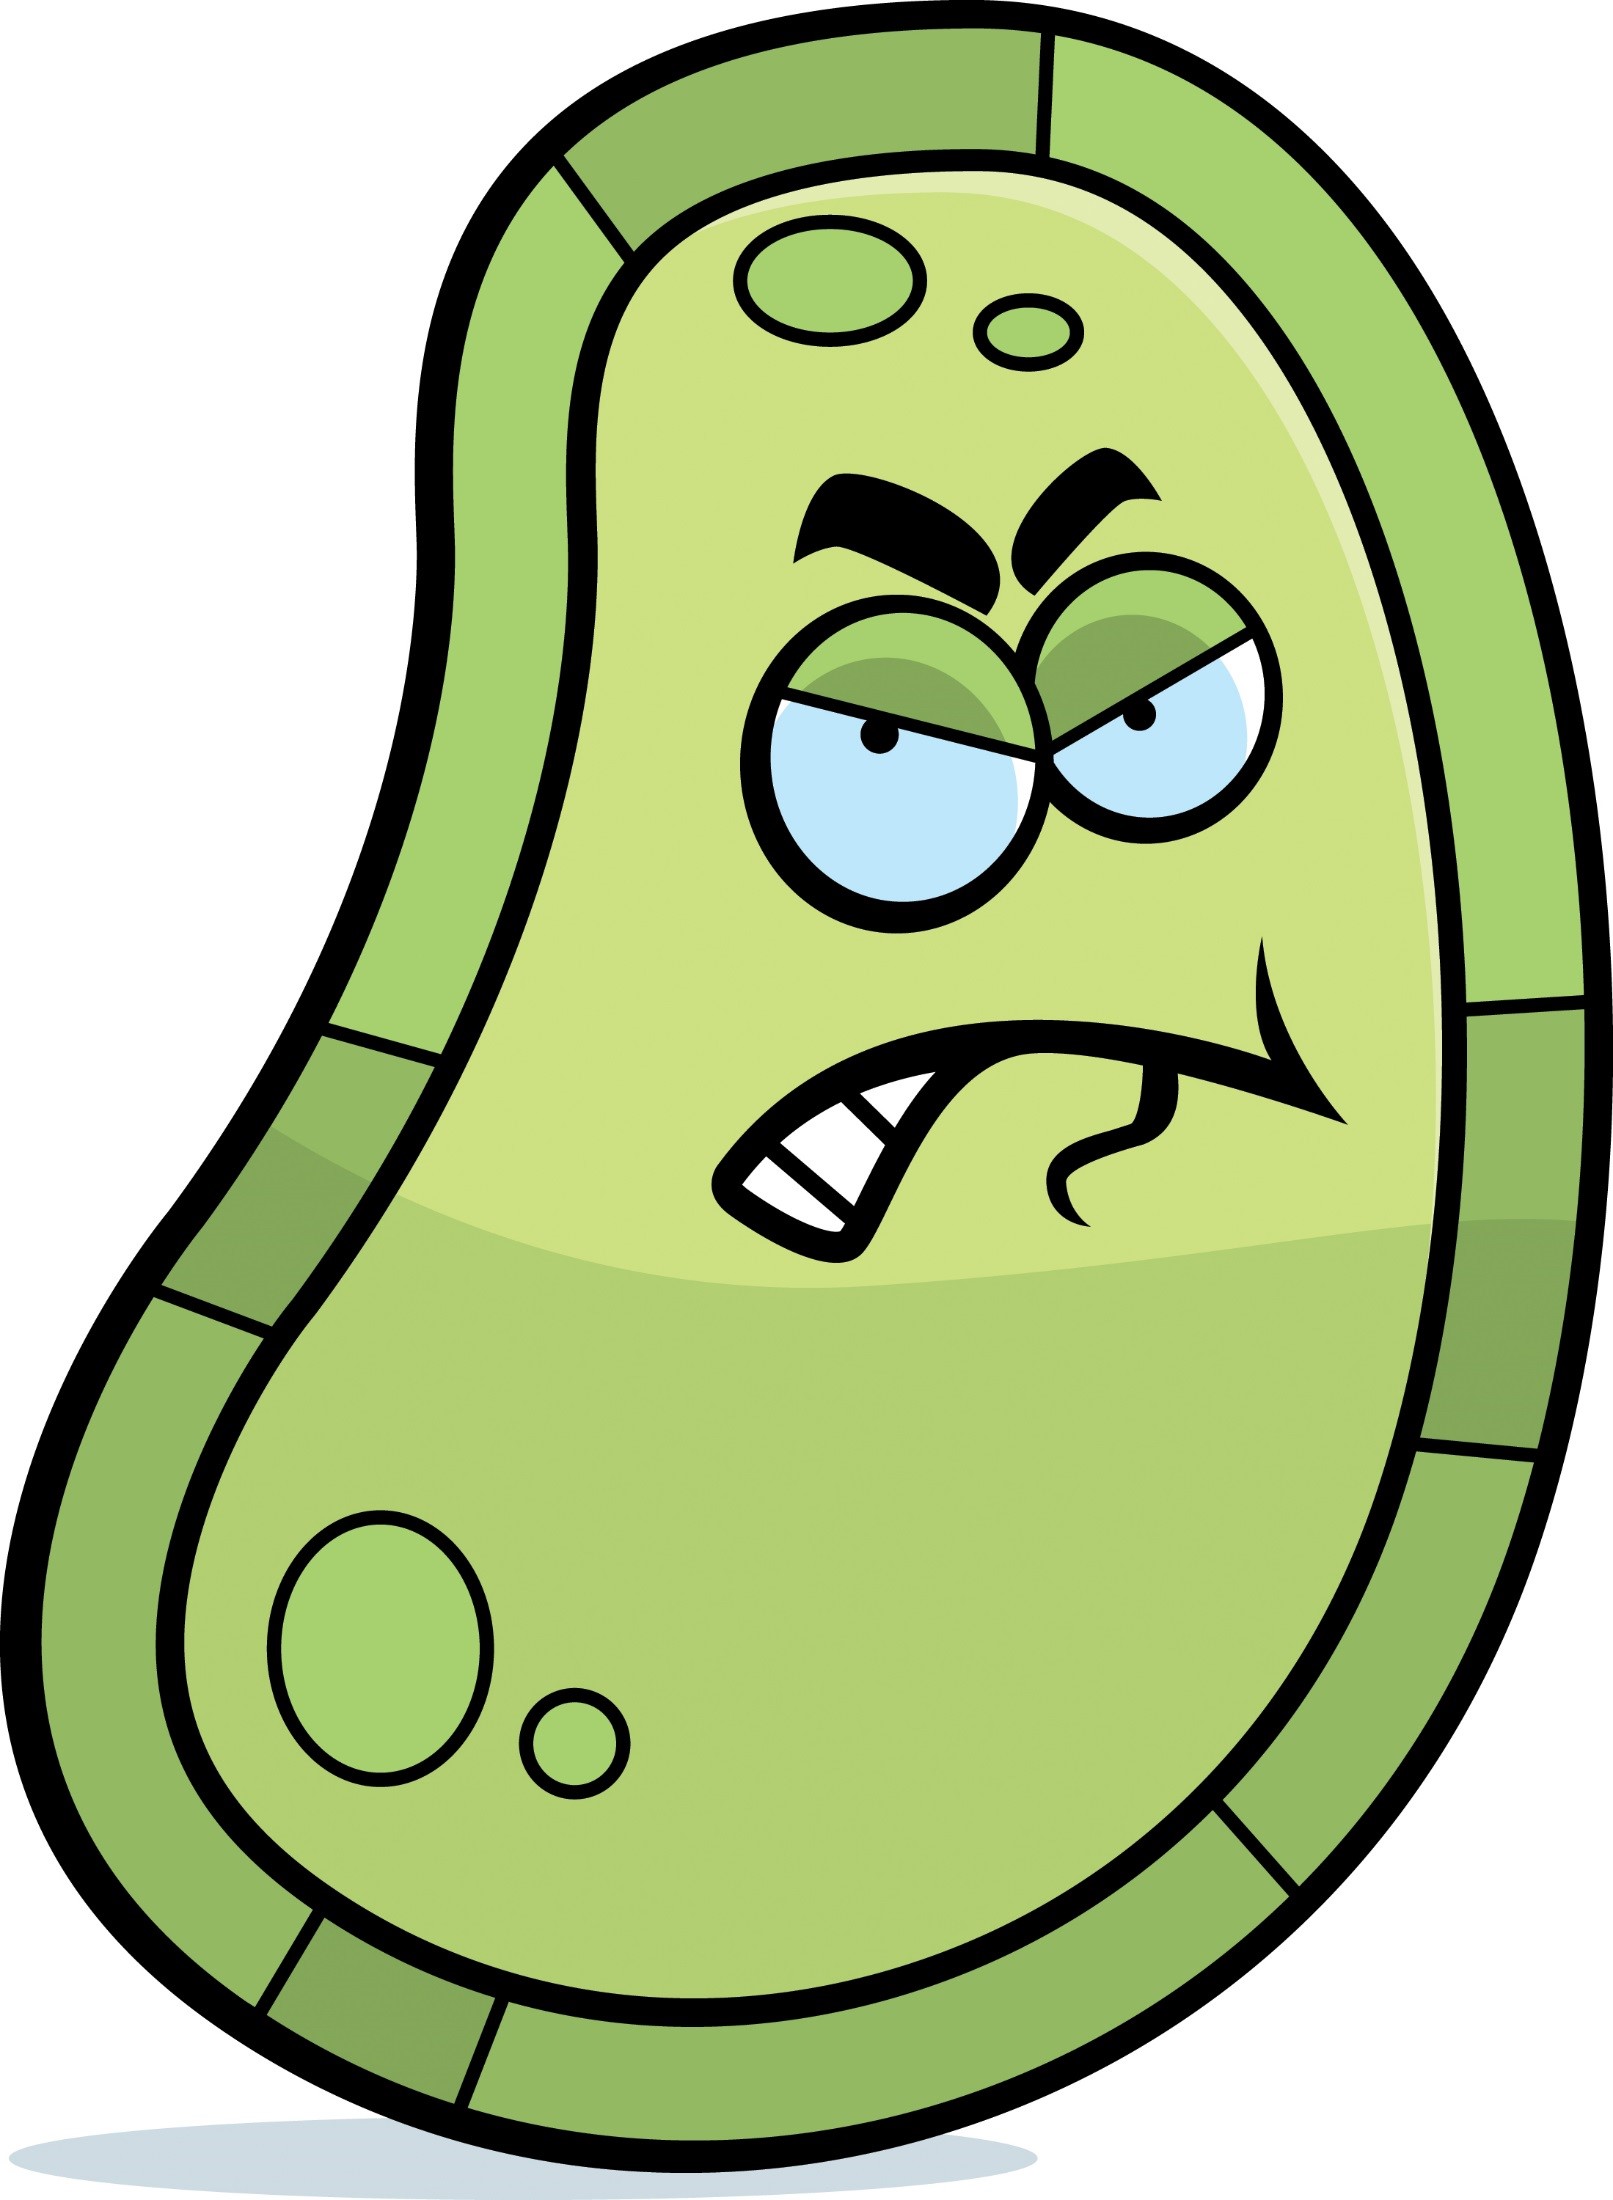 Bacteria clipart angry. You may have bugs